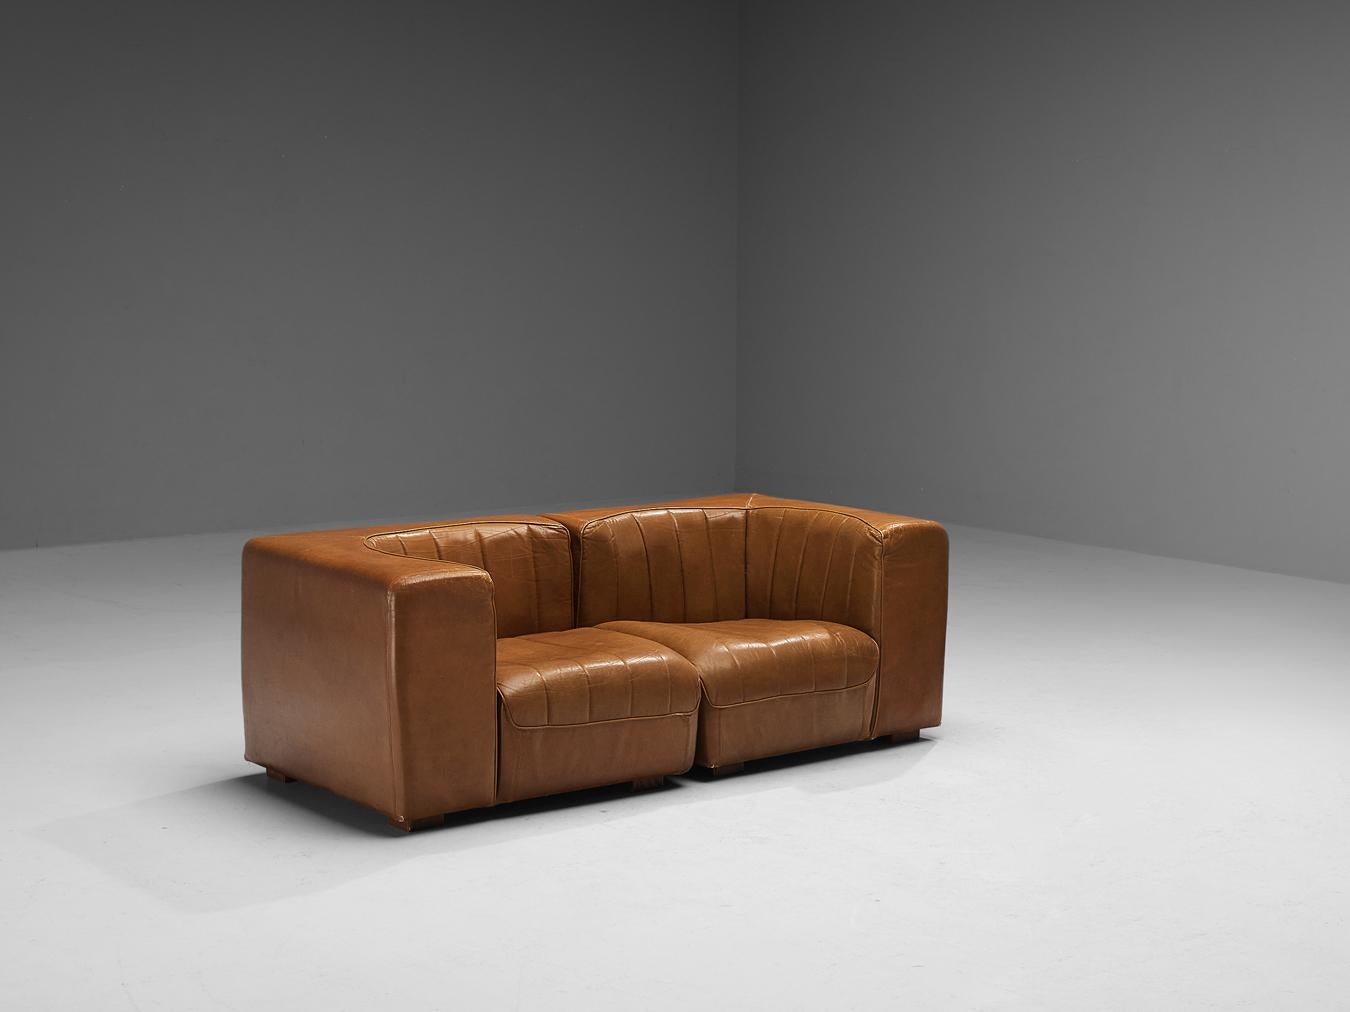 Tito Agnoli for Arflex, two seat sofa, model '9000', patinated leather, wood, Italy, 1969

This design is characterized by a cubic outer frame that provides a visually interesting contrast to the round seat. When seated you experience a pleasant